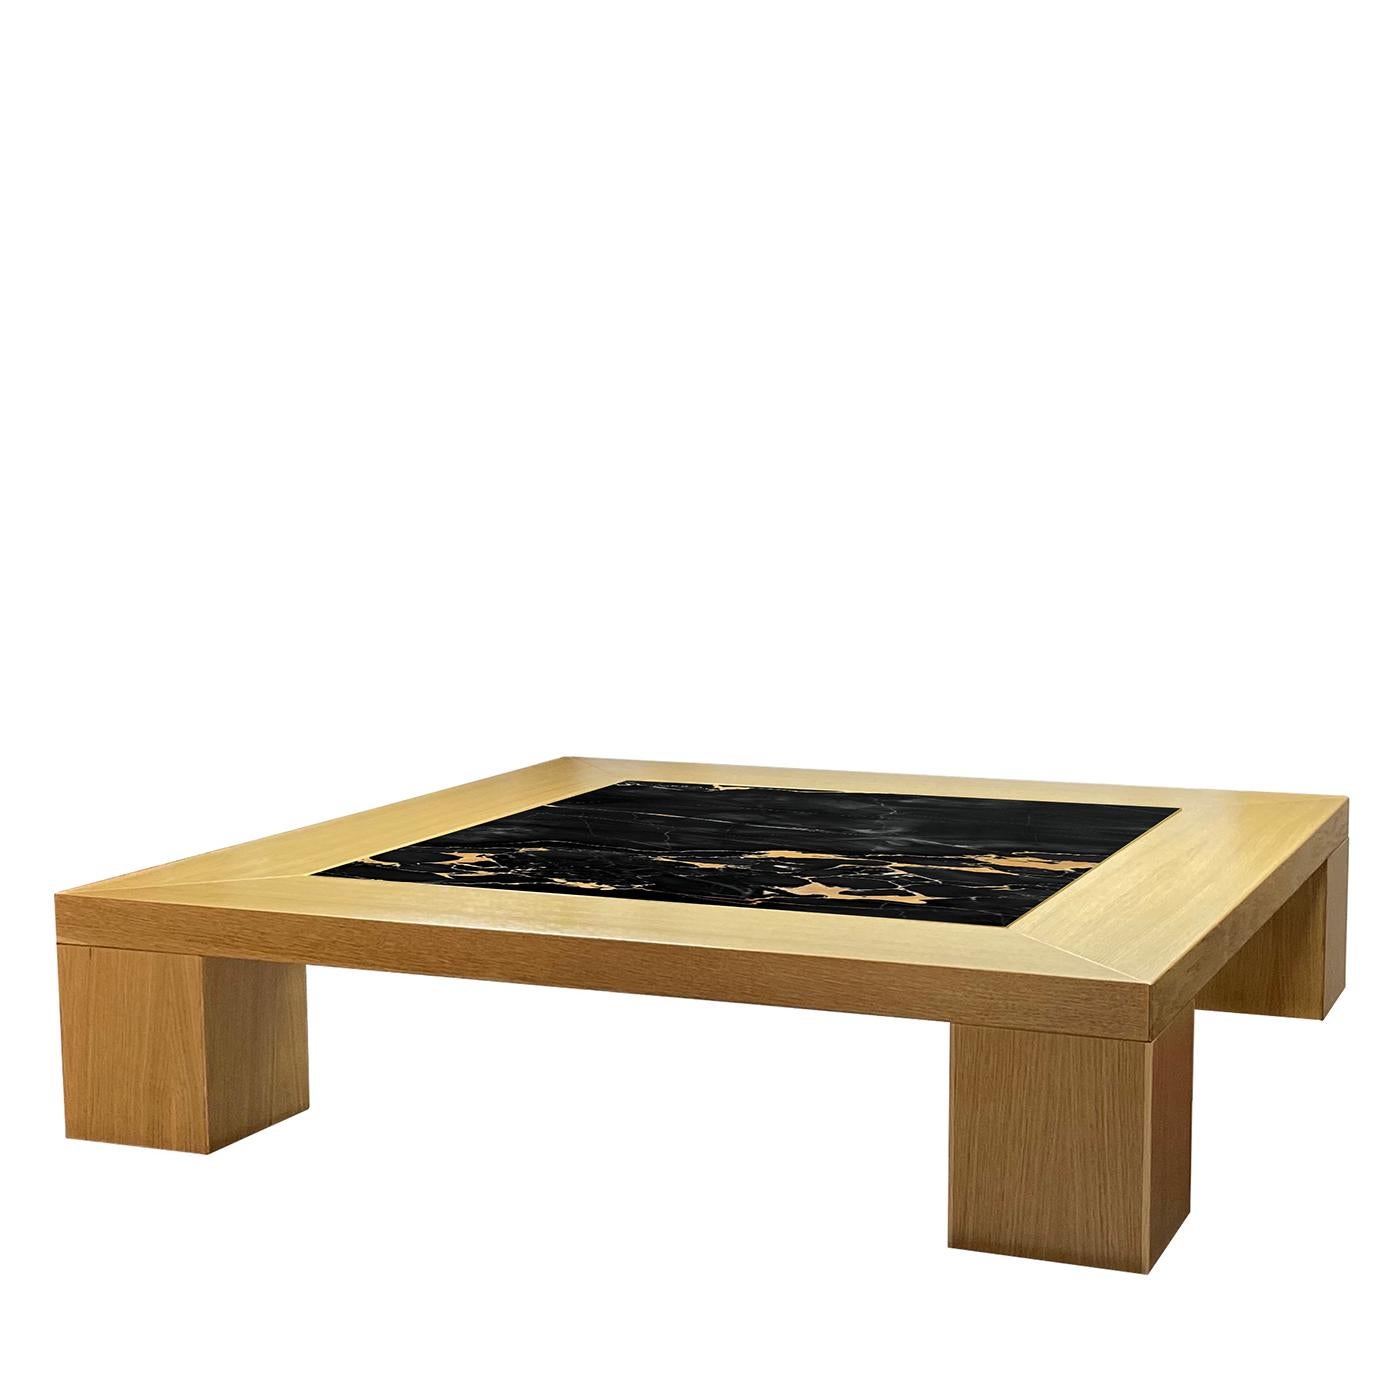 This exquisite coffee table was designed by Ferdinando Meccani having opulence and minimalism in mind. Part of a numbered series counting 10 pieces, it sports an essential yet bold durmast silhouette enriched at the top by a breathtaking inlay in